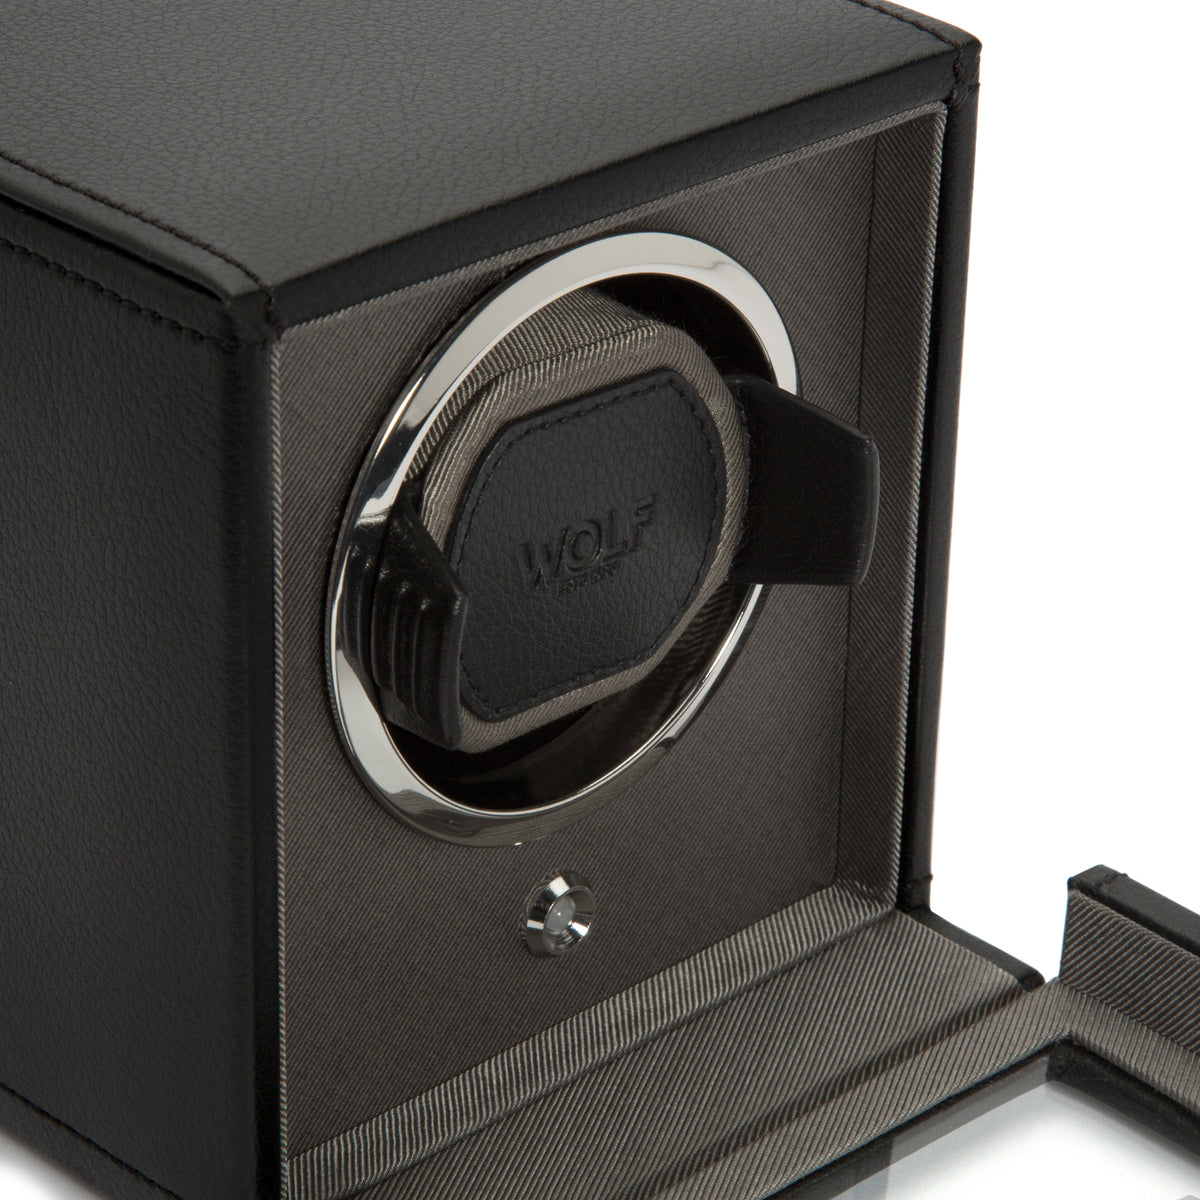 Wolf Cub Single Watch Winder With Cover - Black